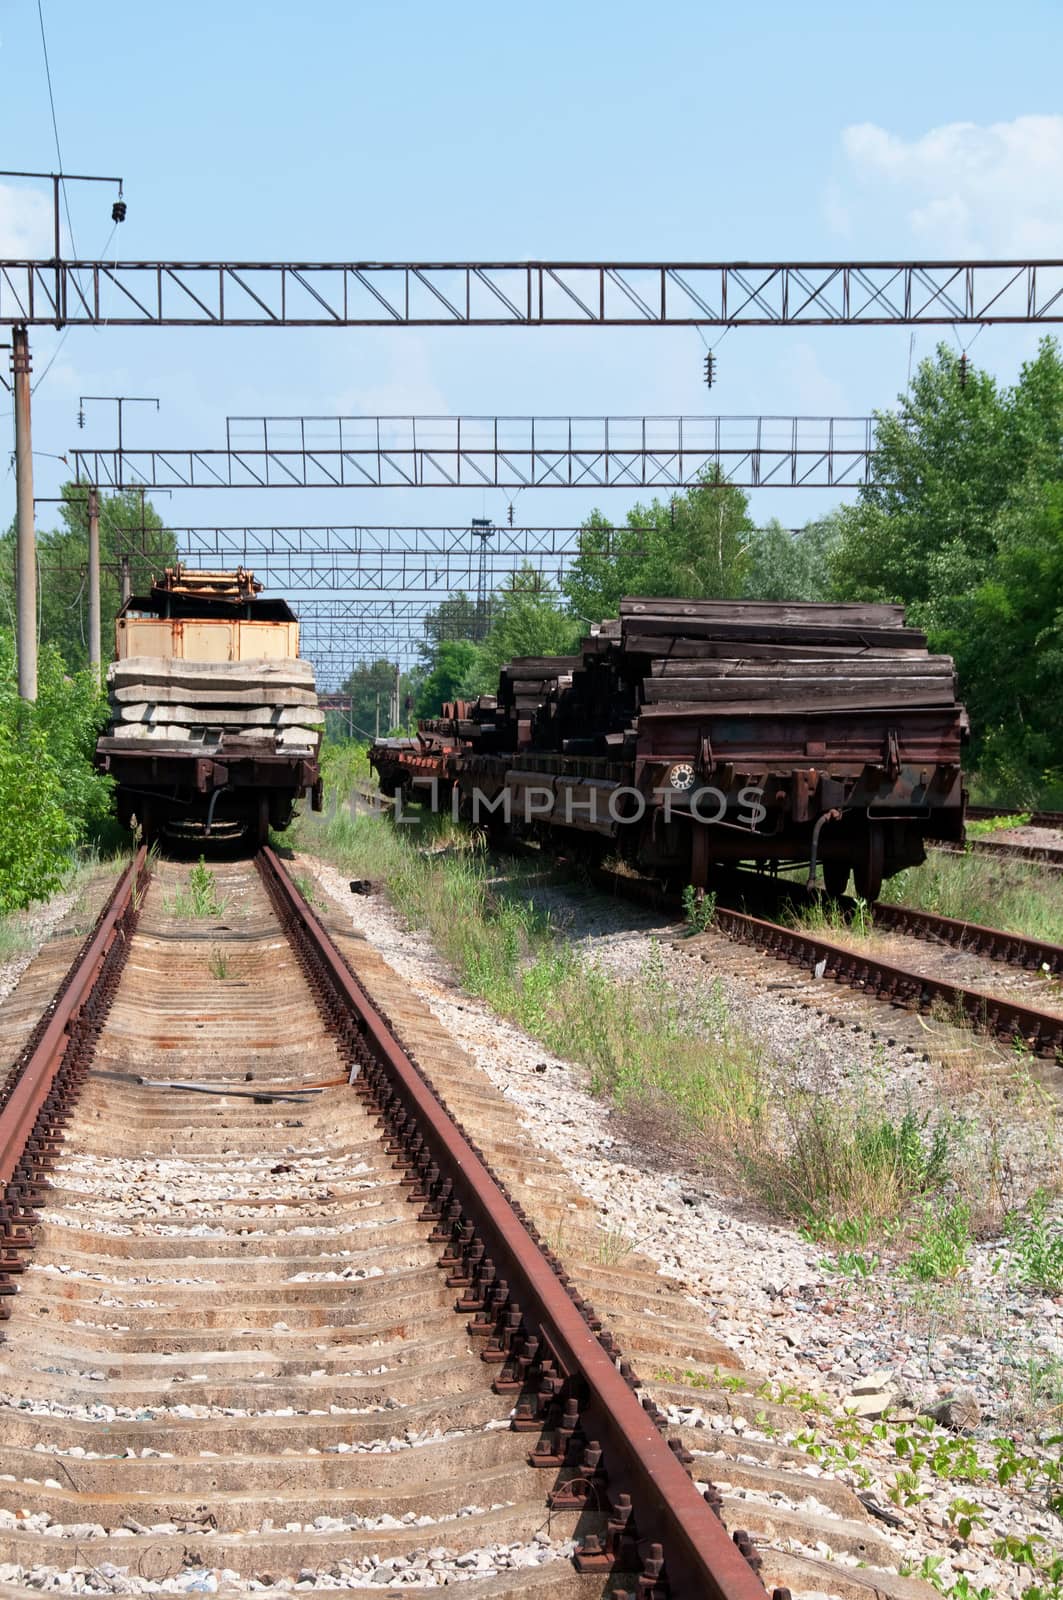 Railway tracks with cargo wagons for repairing works in green country